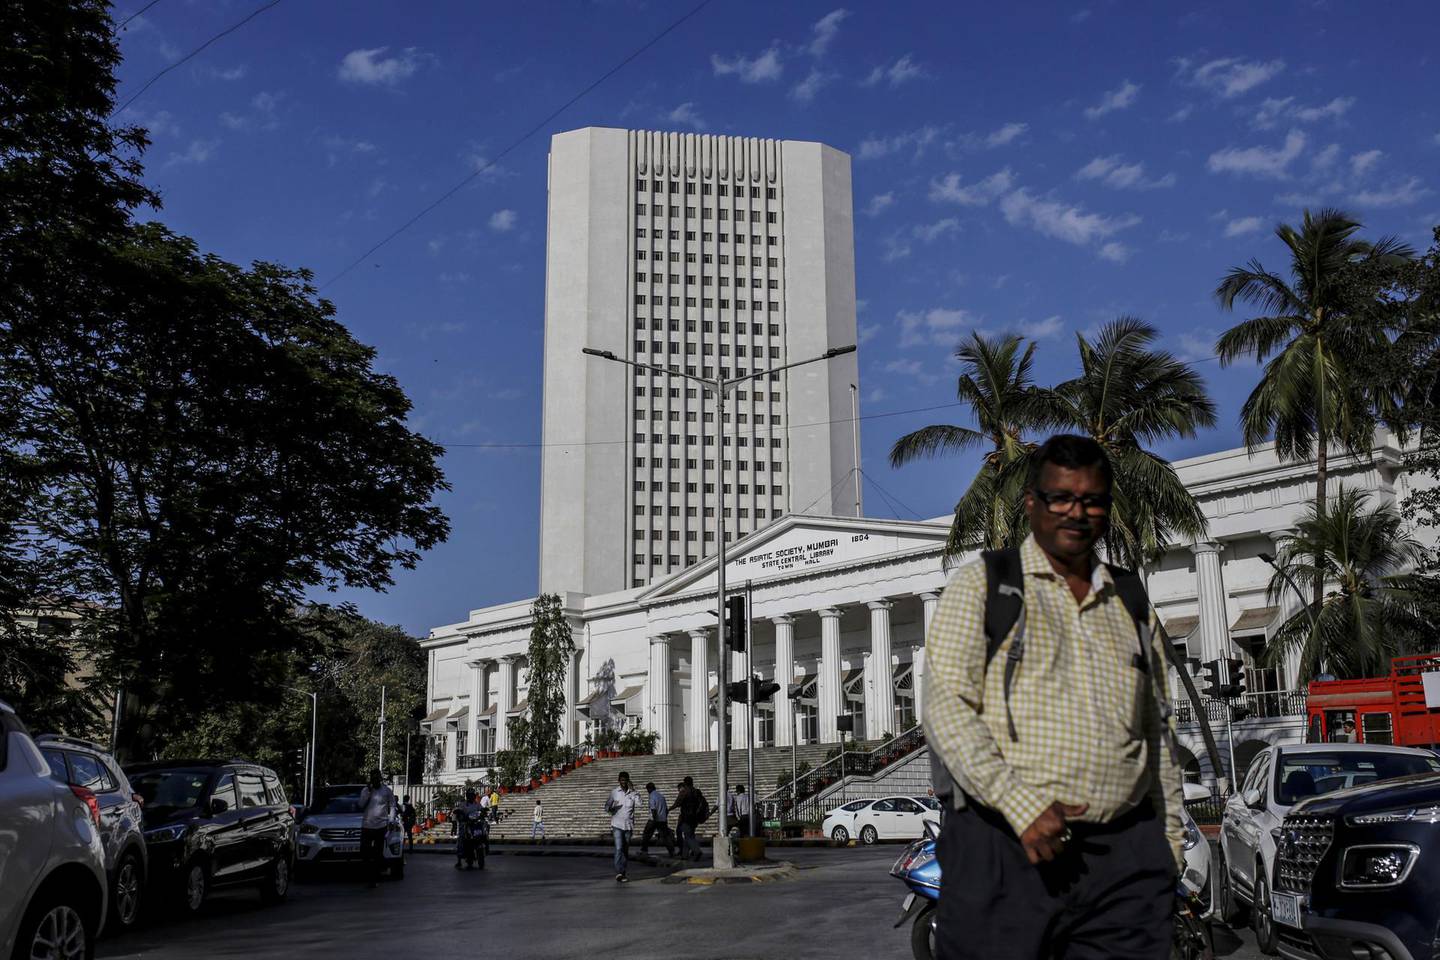 A pedestrian walks past the Reseve Bank of India (RBI) in Mumbai, India, on Monday, March. 9, 2020. A top Indian official said there's no need for the government to take immediate steps to support the economy following a crash in oil prices that has sent financial markets into a tailspin. Photographer: Dhiraj Singh/Bloomberg